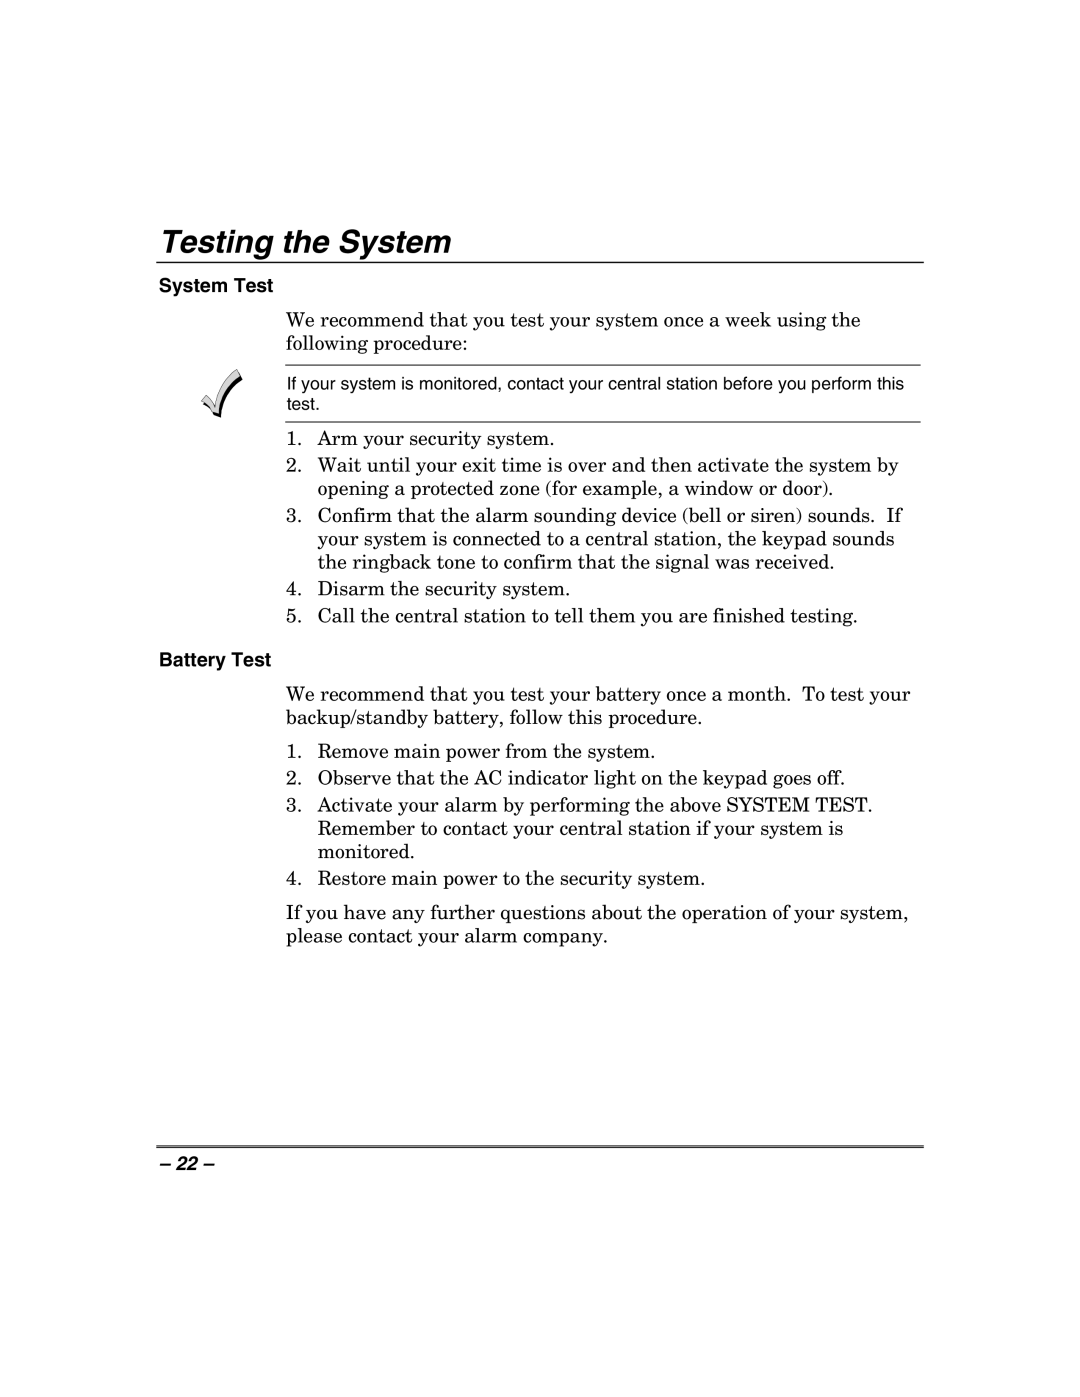 Honeywell 408EU manual Testing the System, System Test, Battery Test 